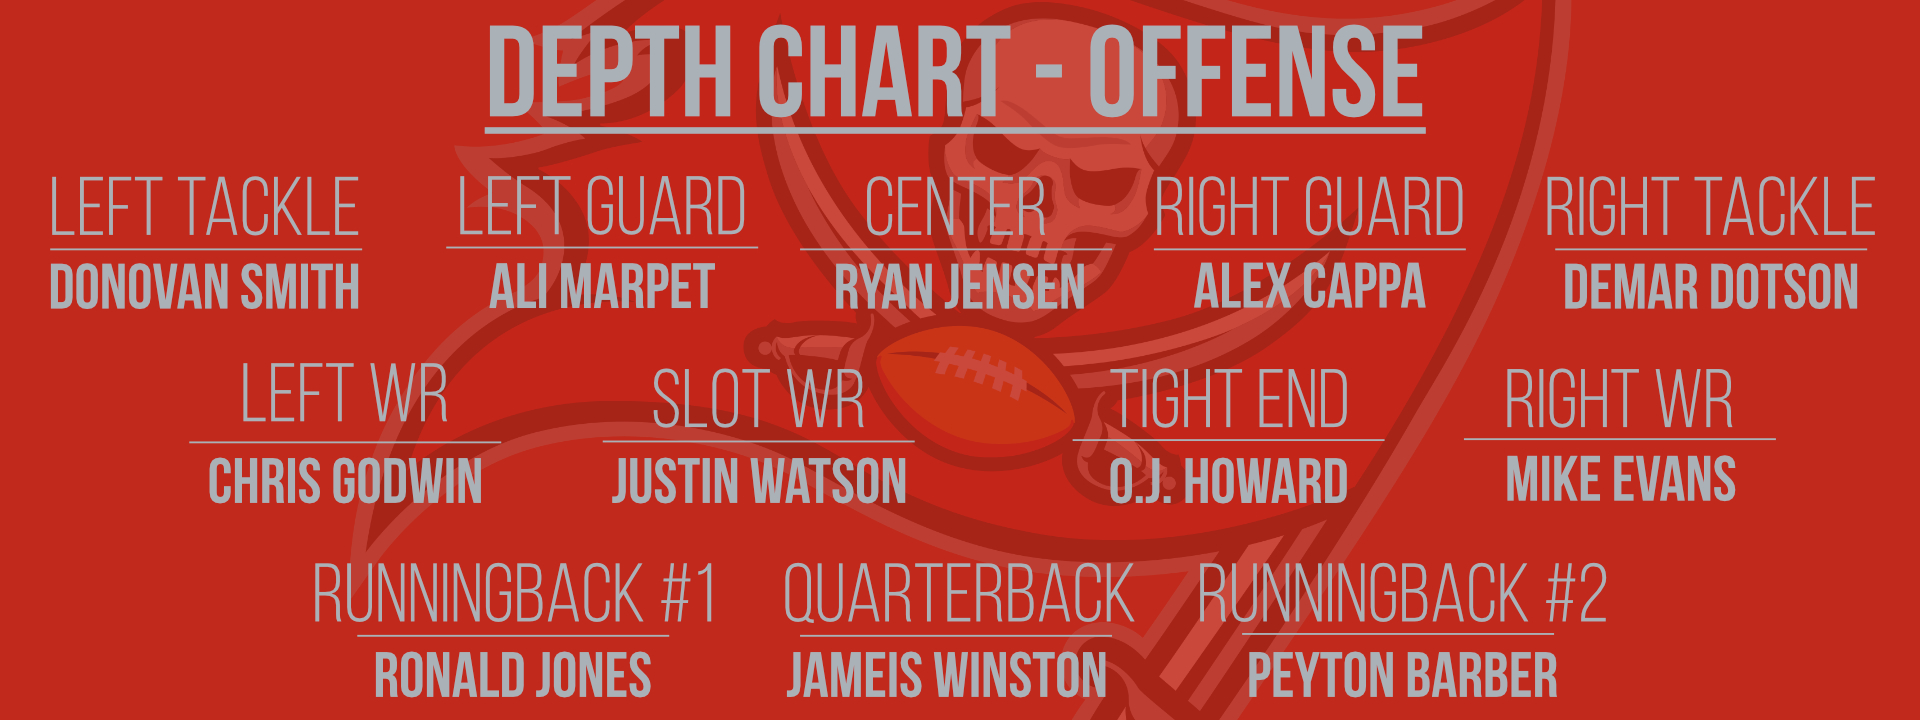 Tampa Bay Buccaneers: Offense